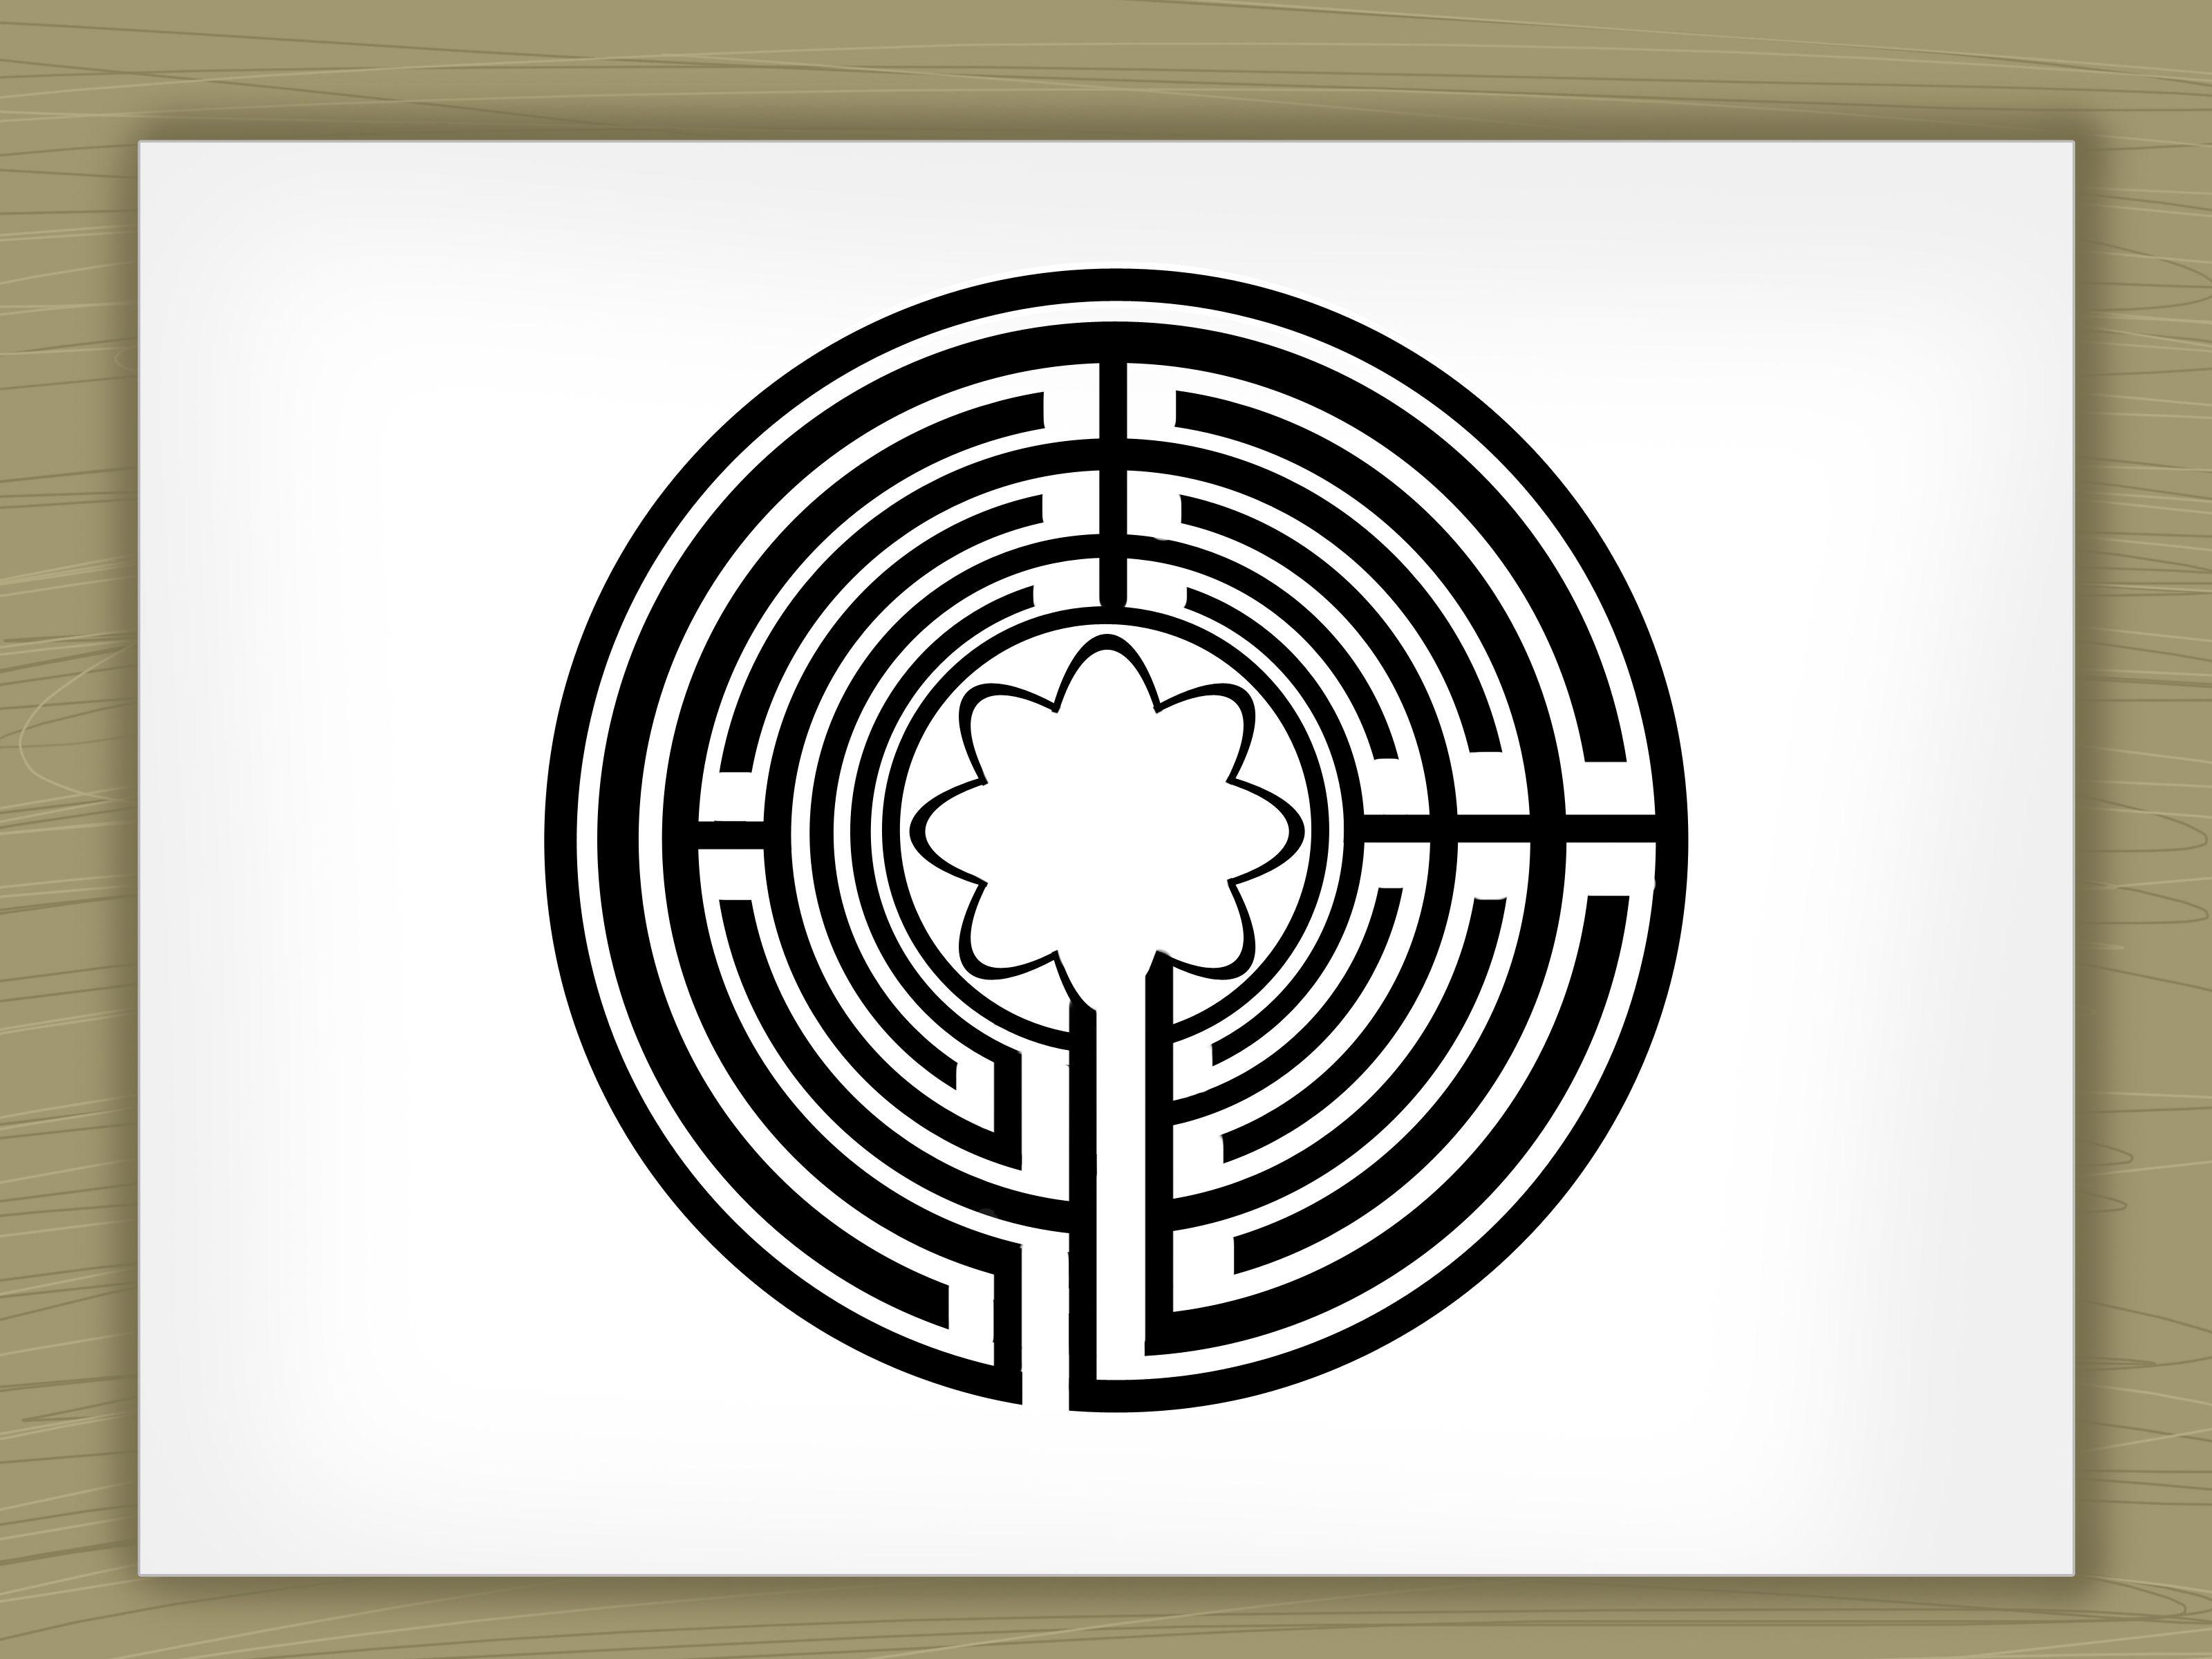 Fun to Draw Logo - How to Draw a Labyrinth: 13 Steps (with Pictures) - wikiHow